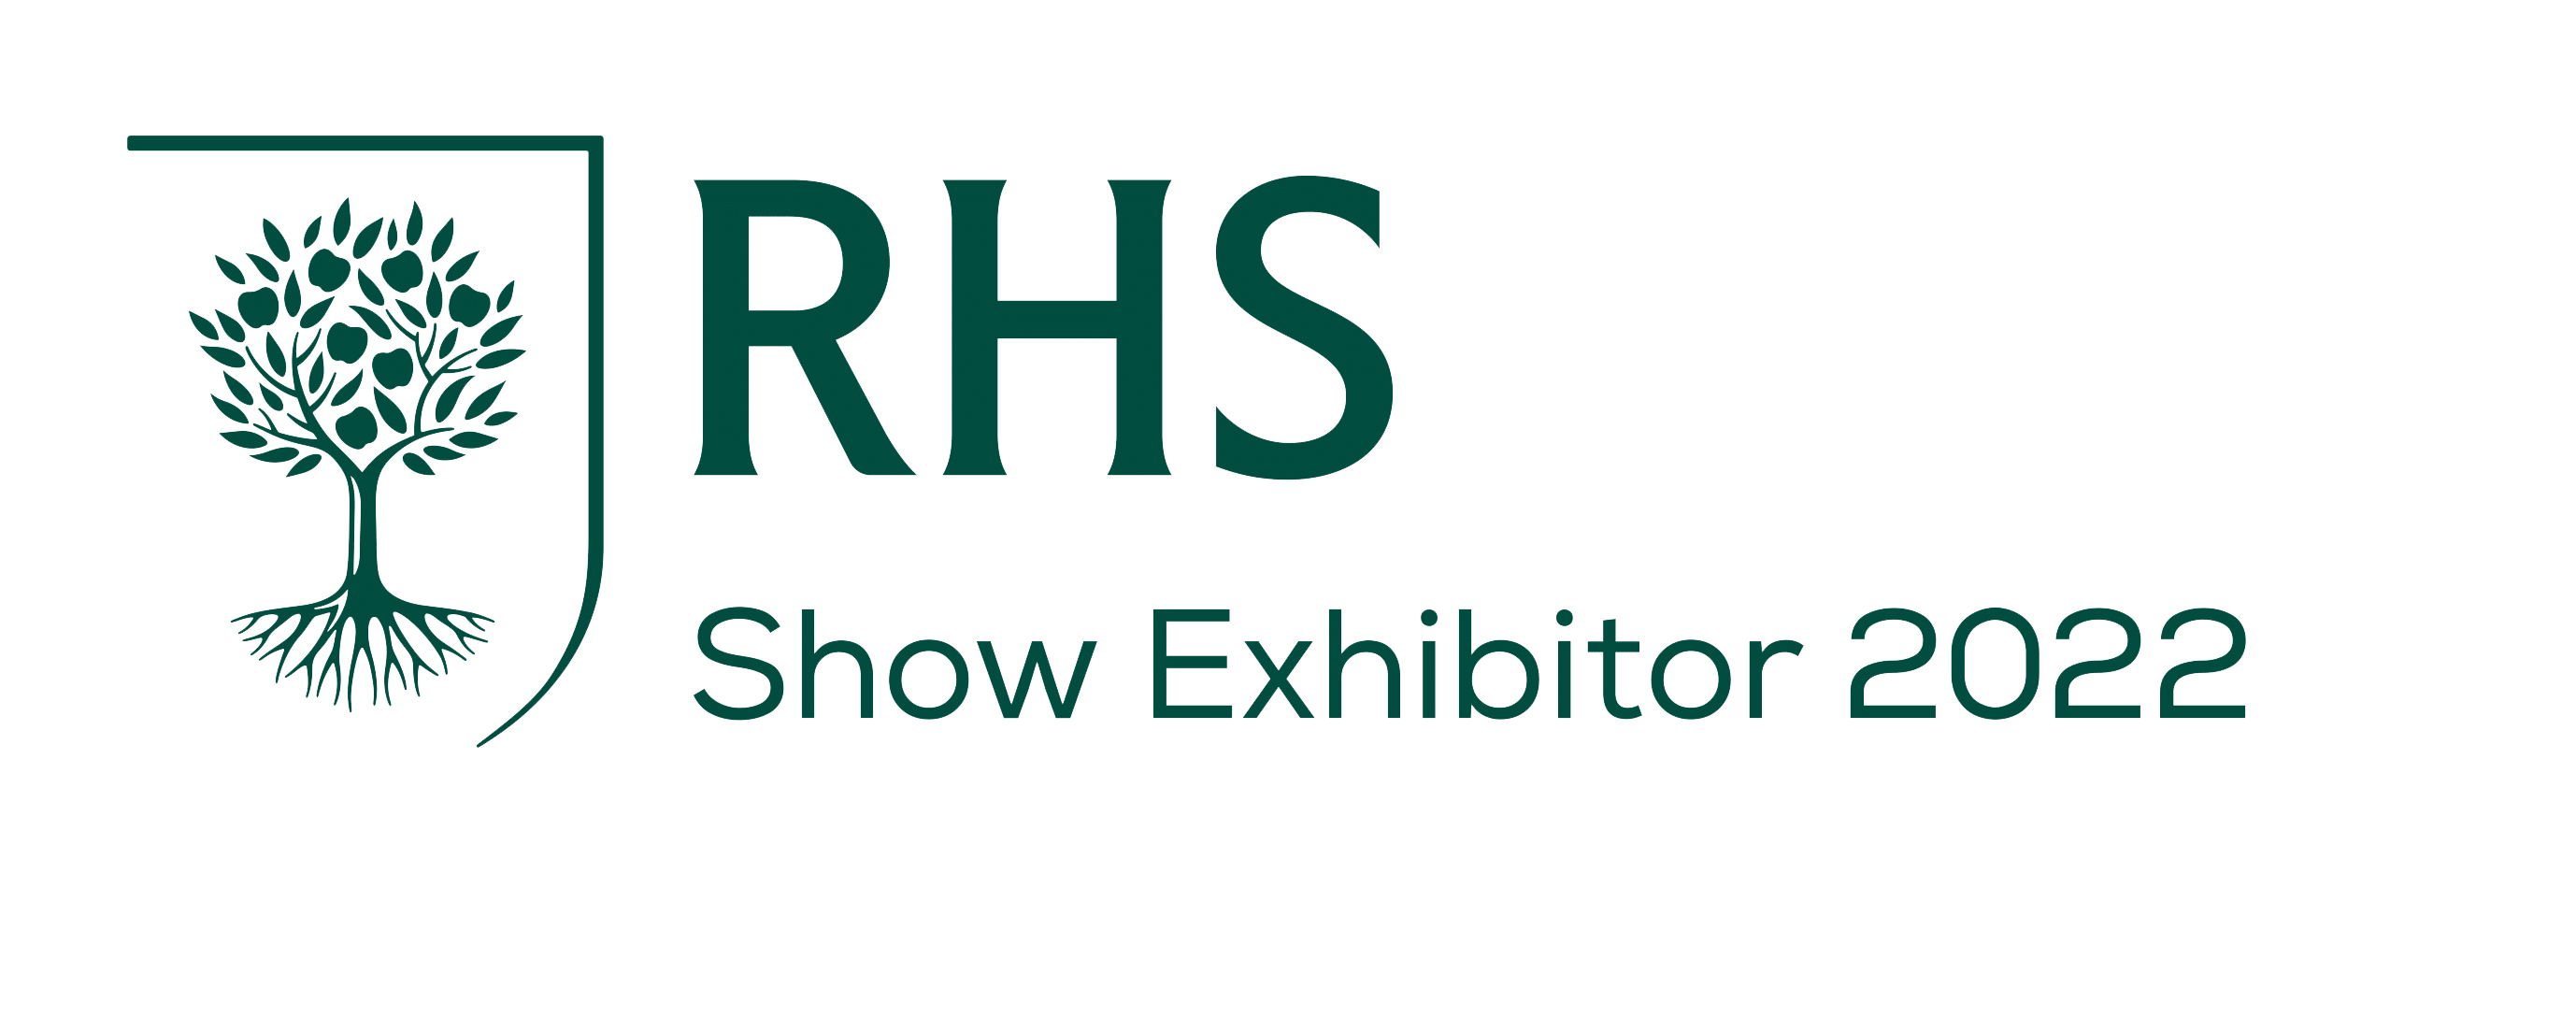 Logo exhibitor at Chelsea Flower Show